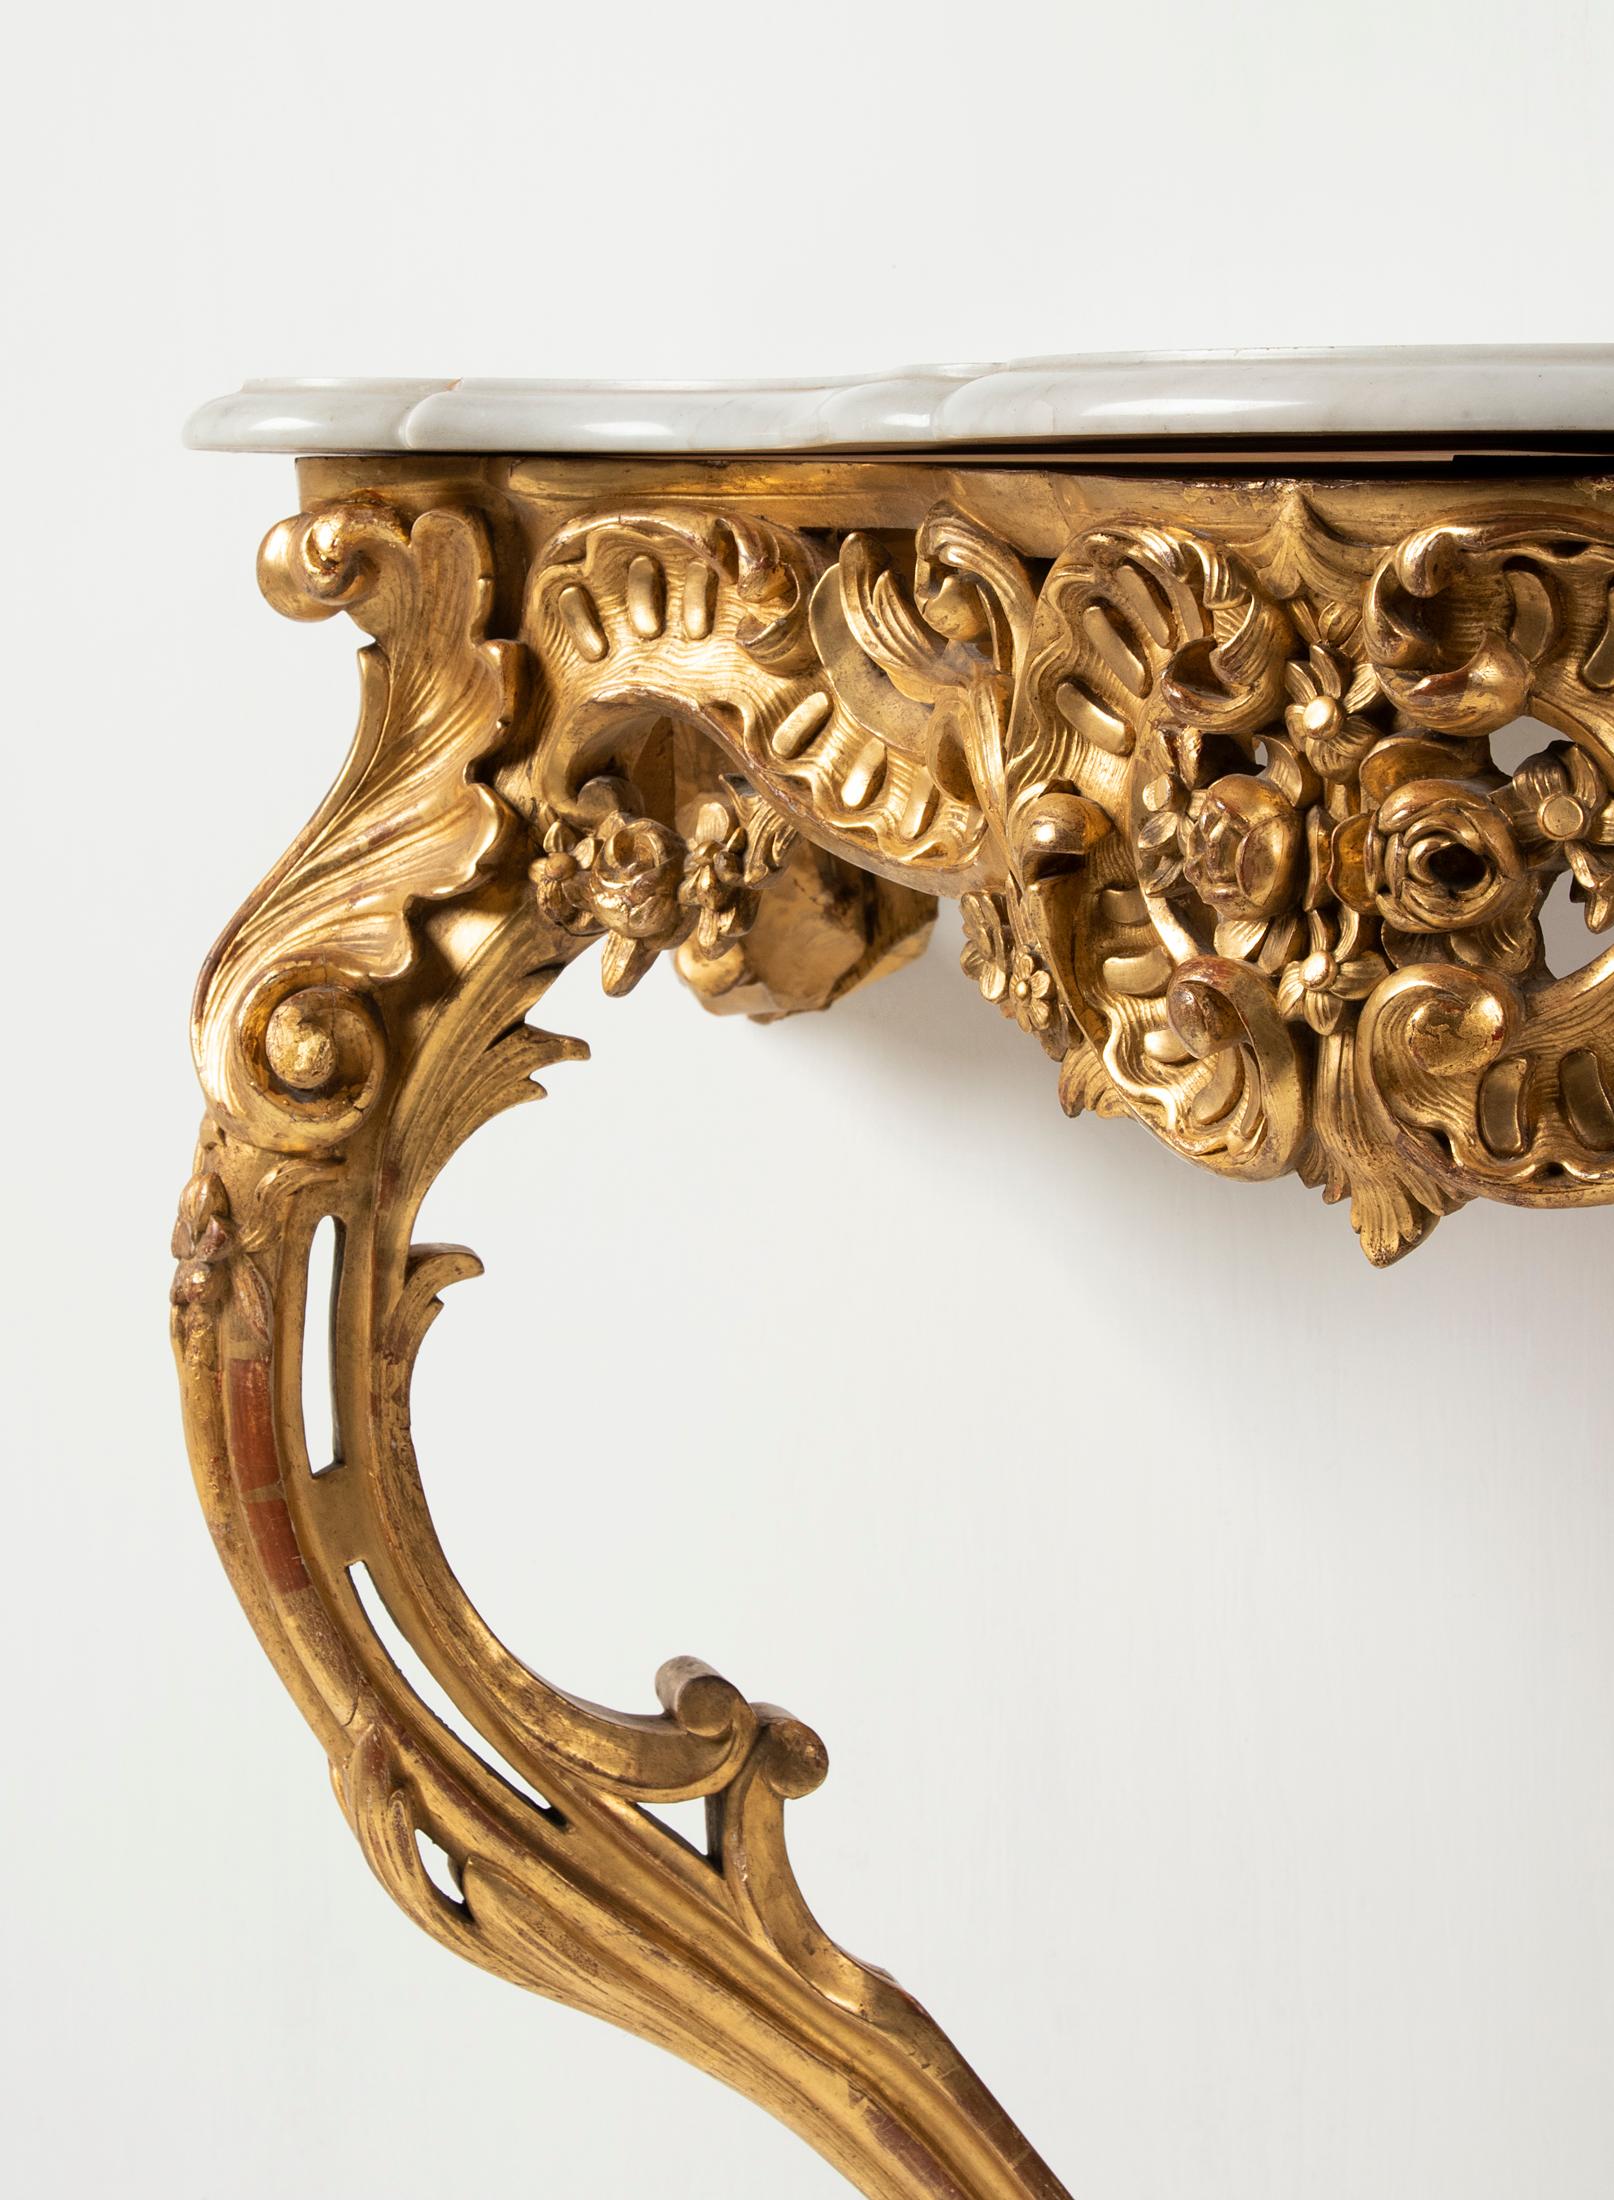 19th Century French Wooden Carved and Gilded Console Table by Maison Janiaud For Sale 3